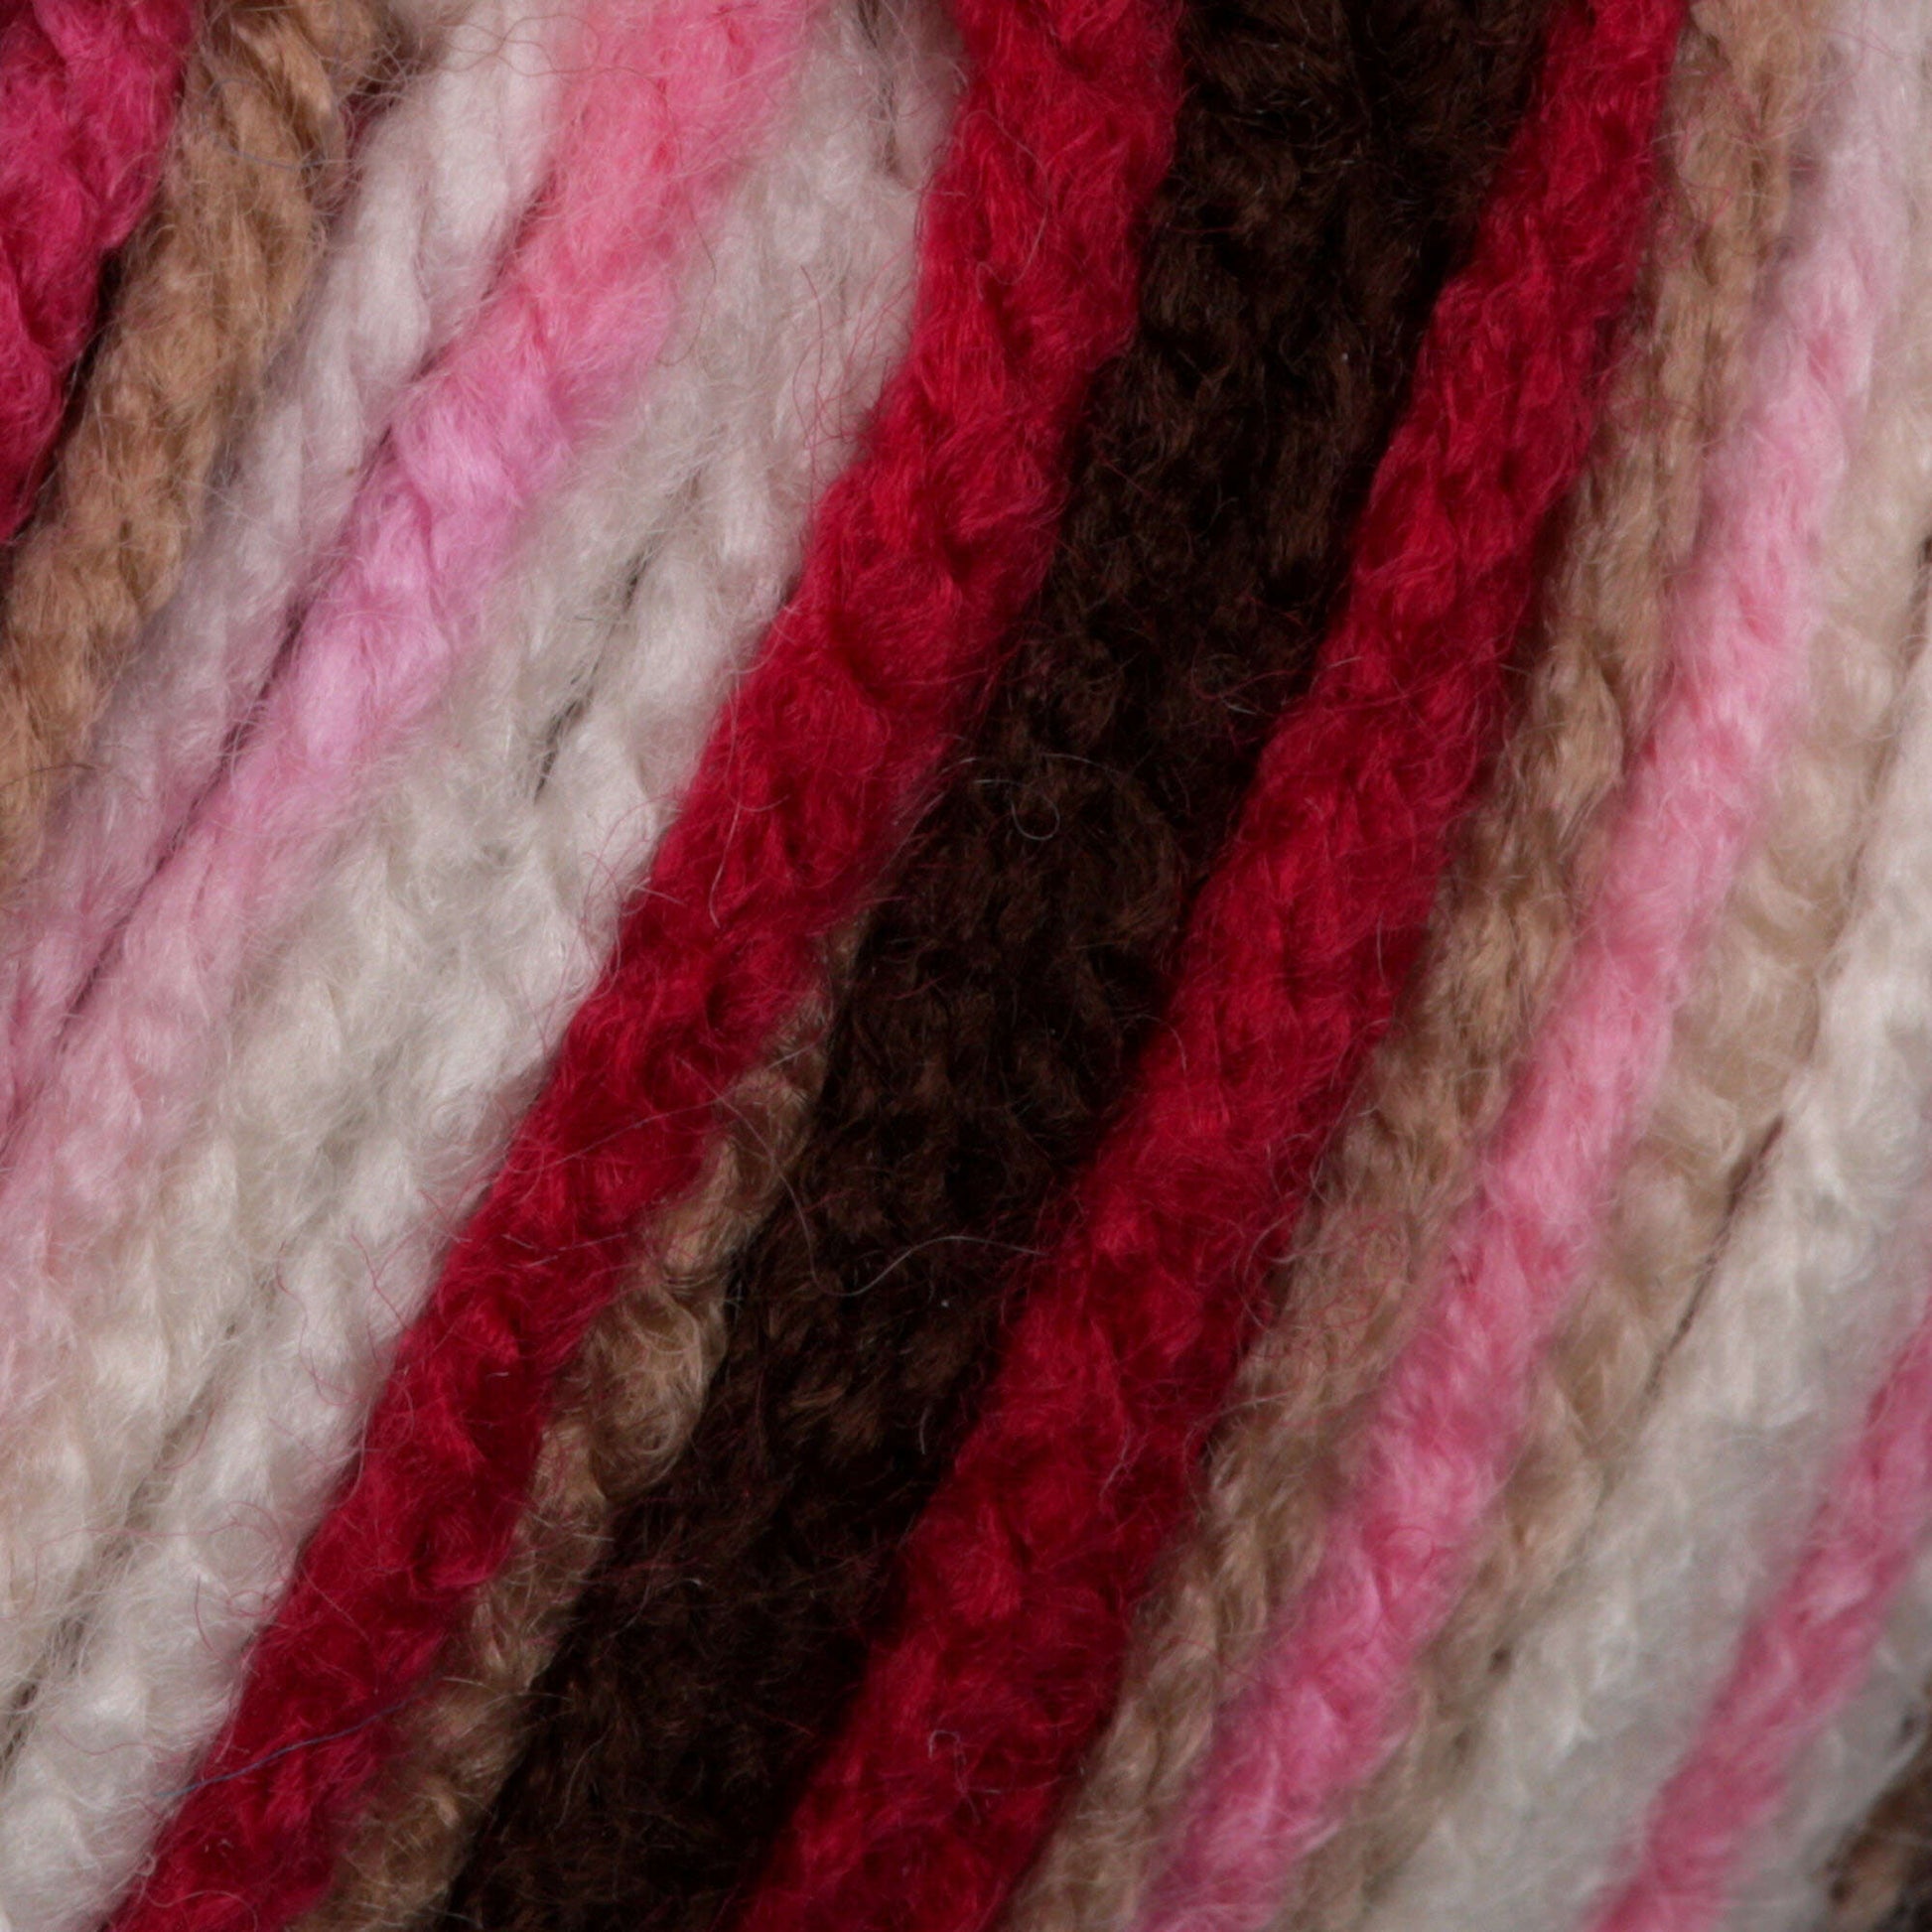 Phentex Worsted Ombre Yarn - Discontinued Shades Chocolate Cherry Ombre